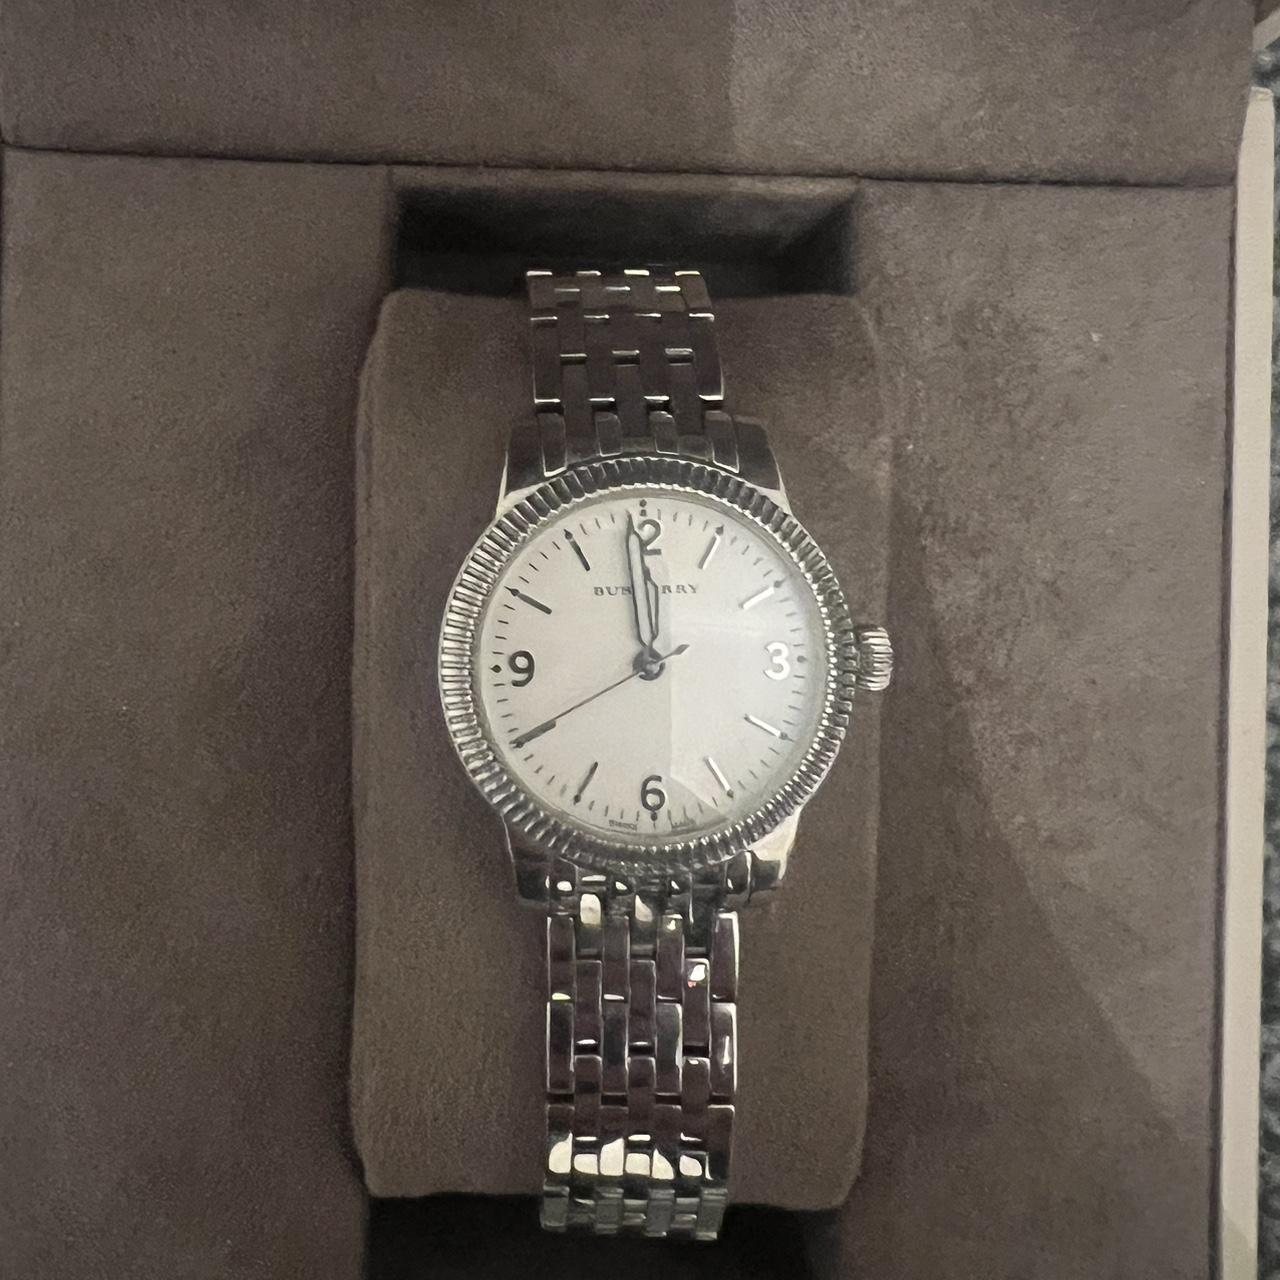 Vintage Burberry Watch Used Links included Battery... - Depop